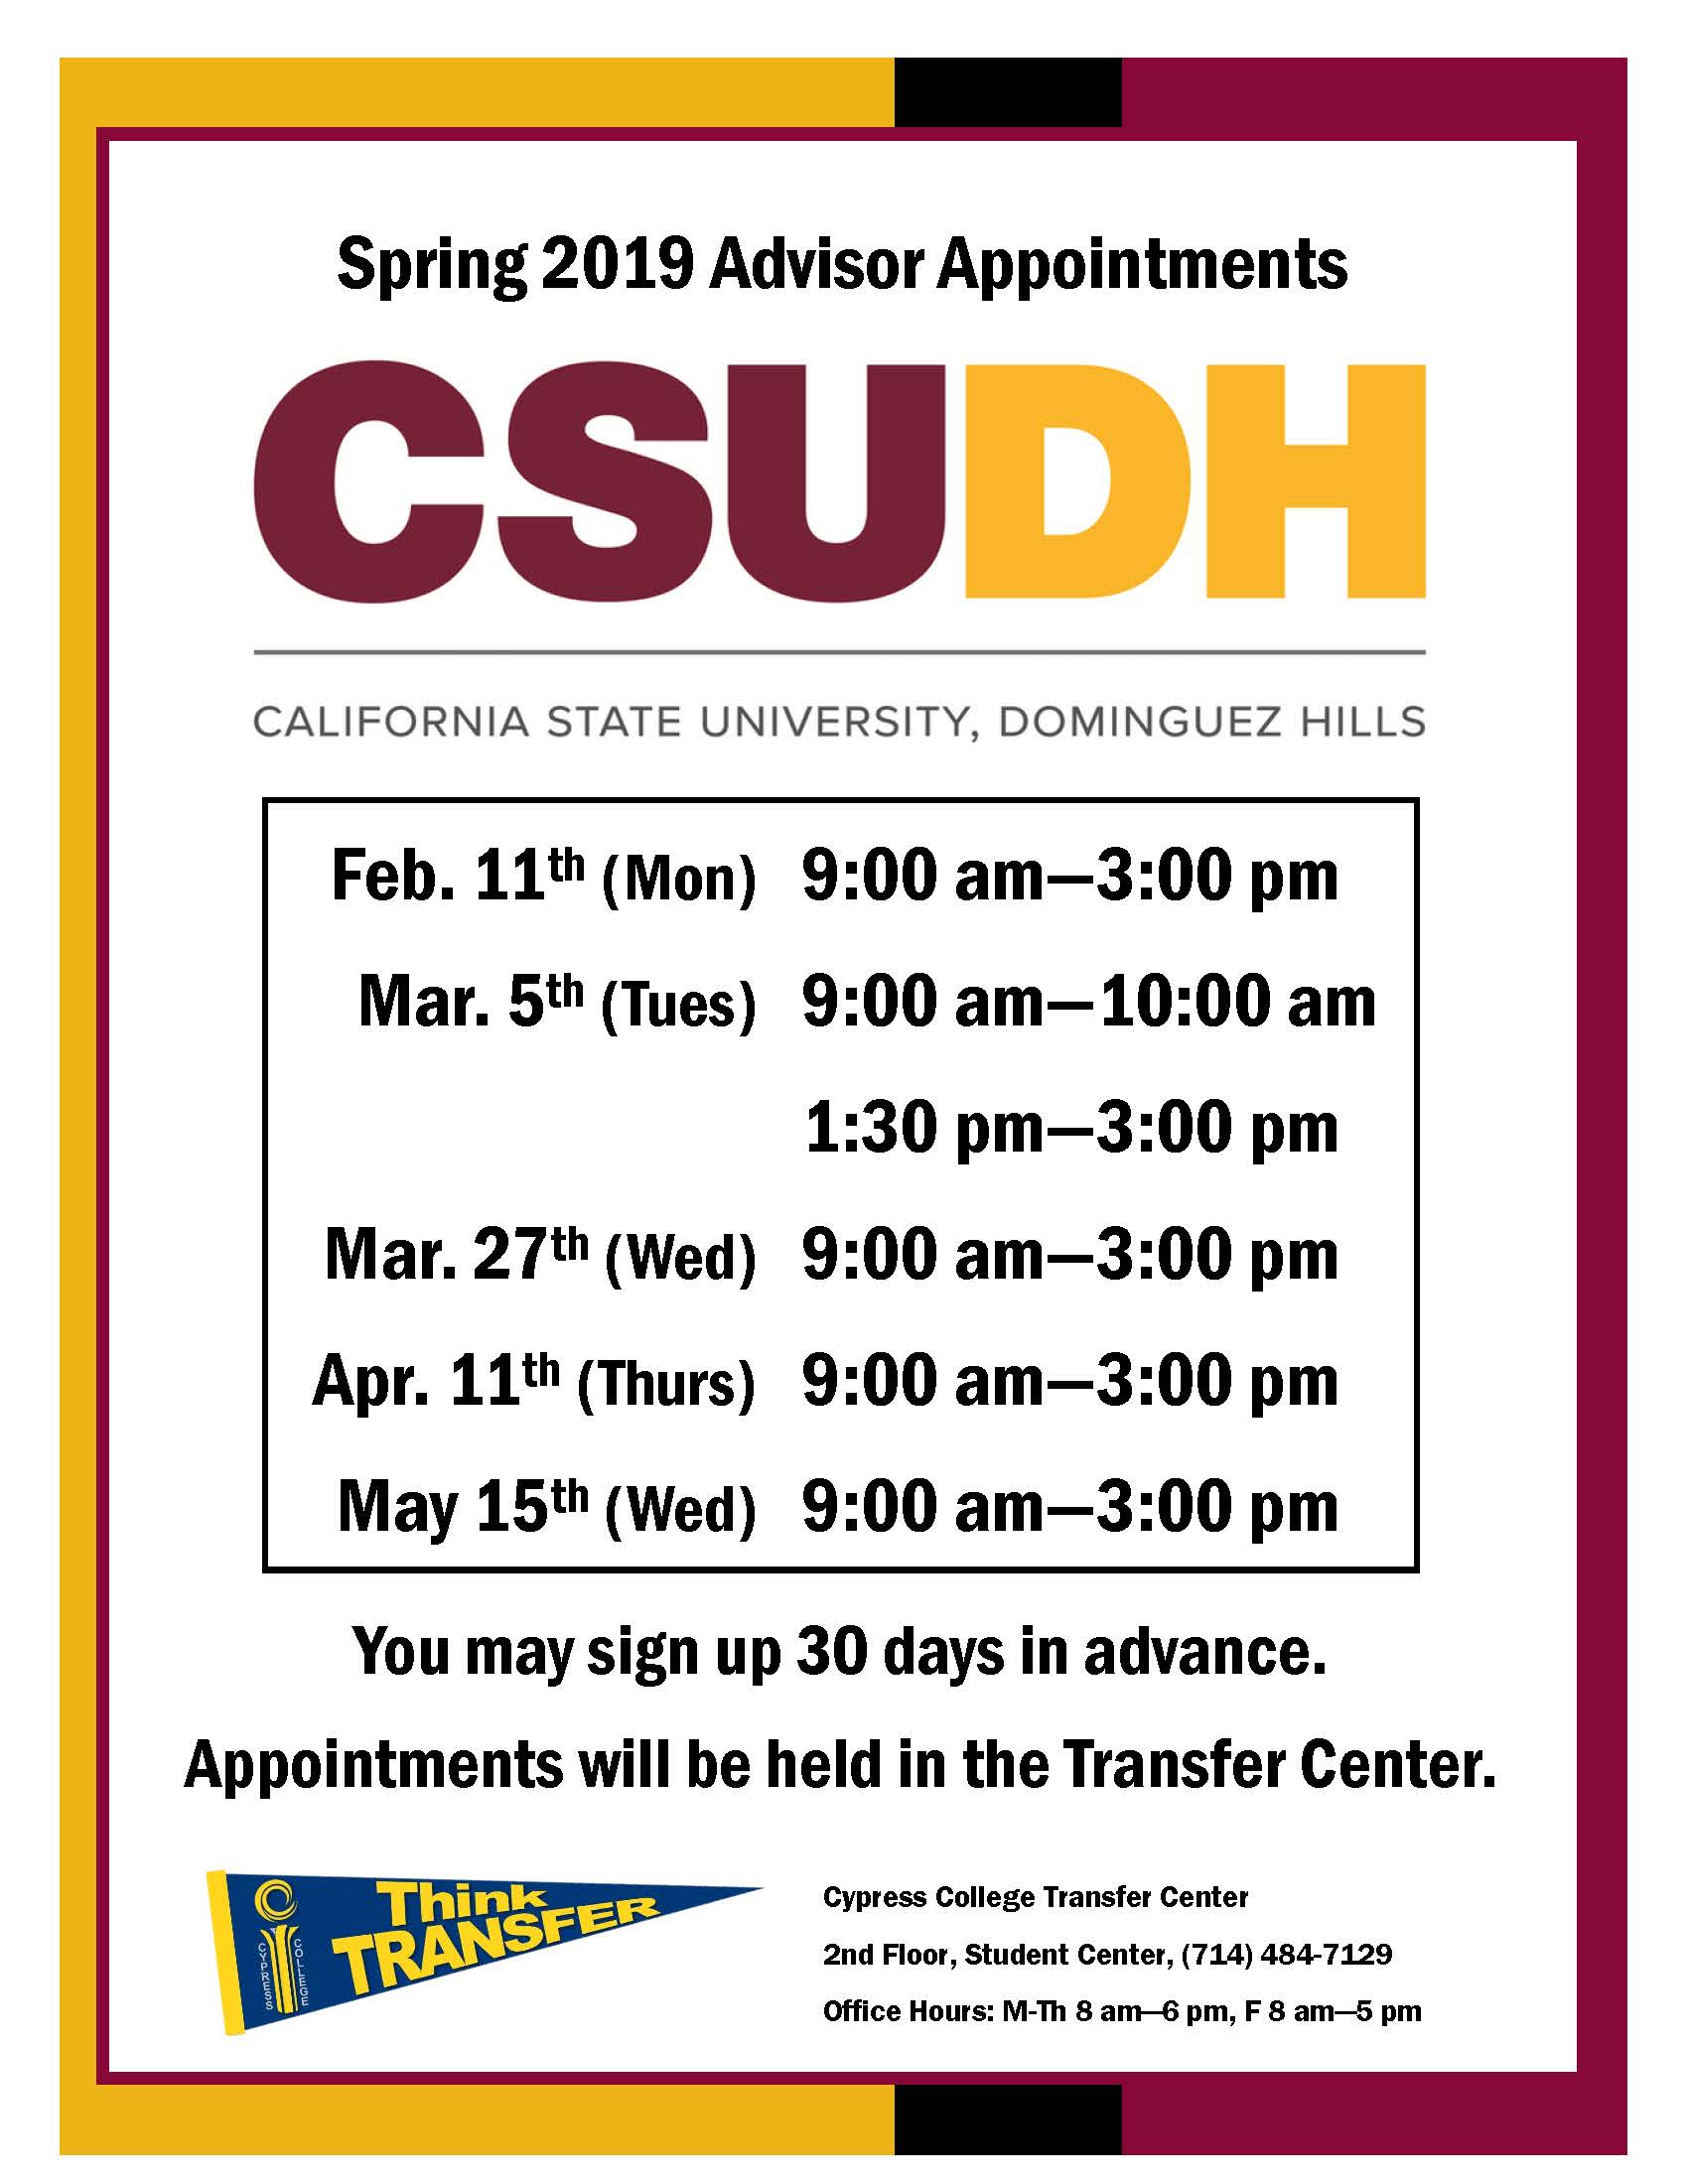 Spring 2019 Advisor Appointments California State University Dominguez Hills flyer